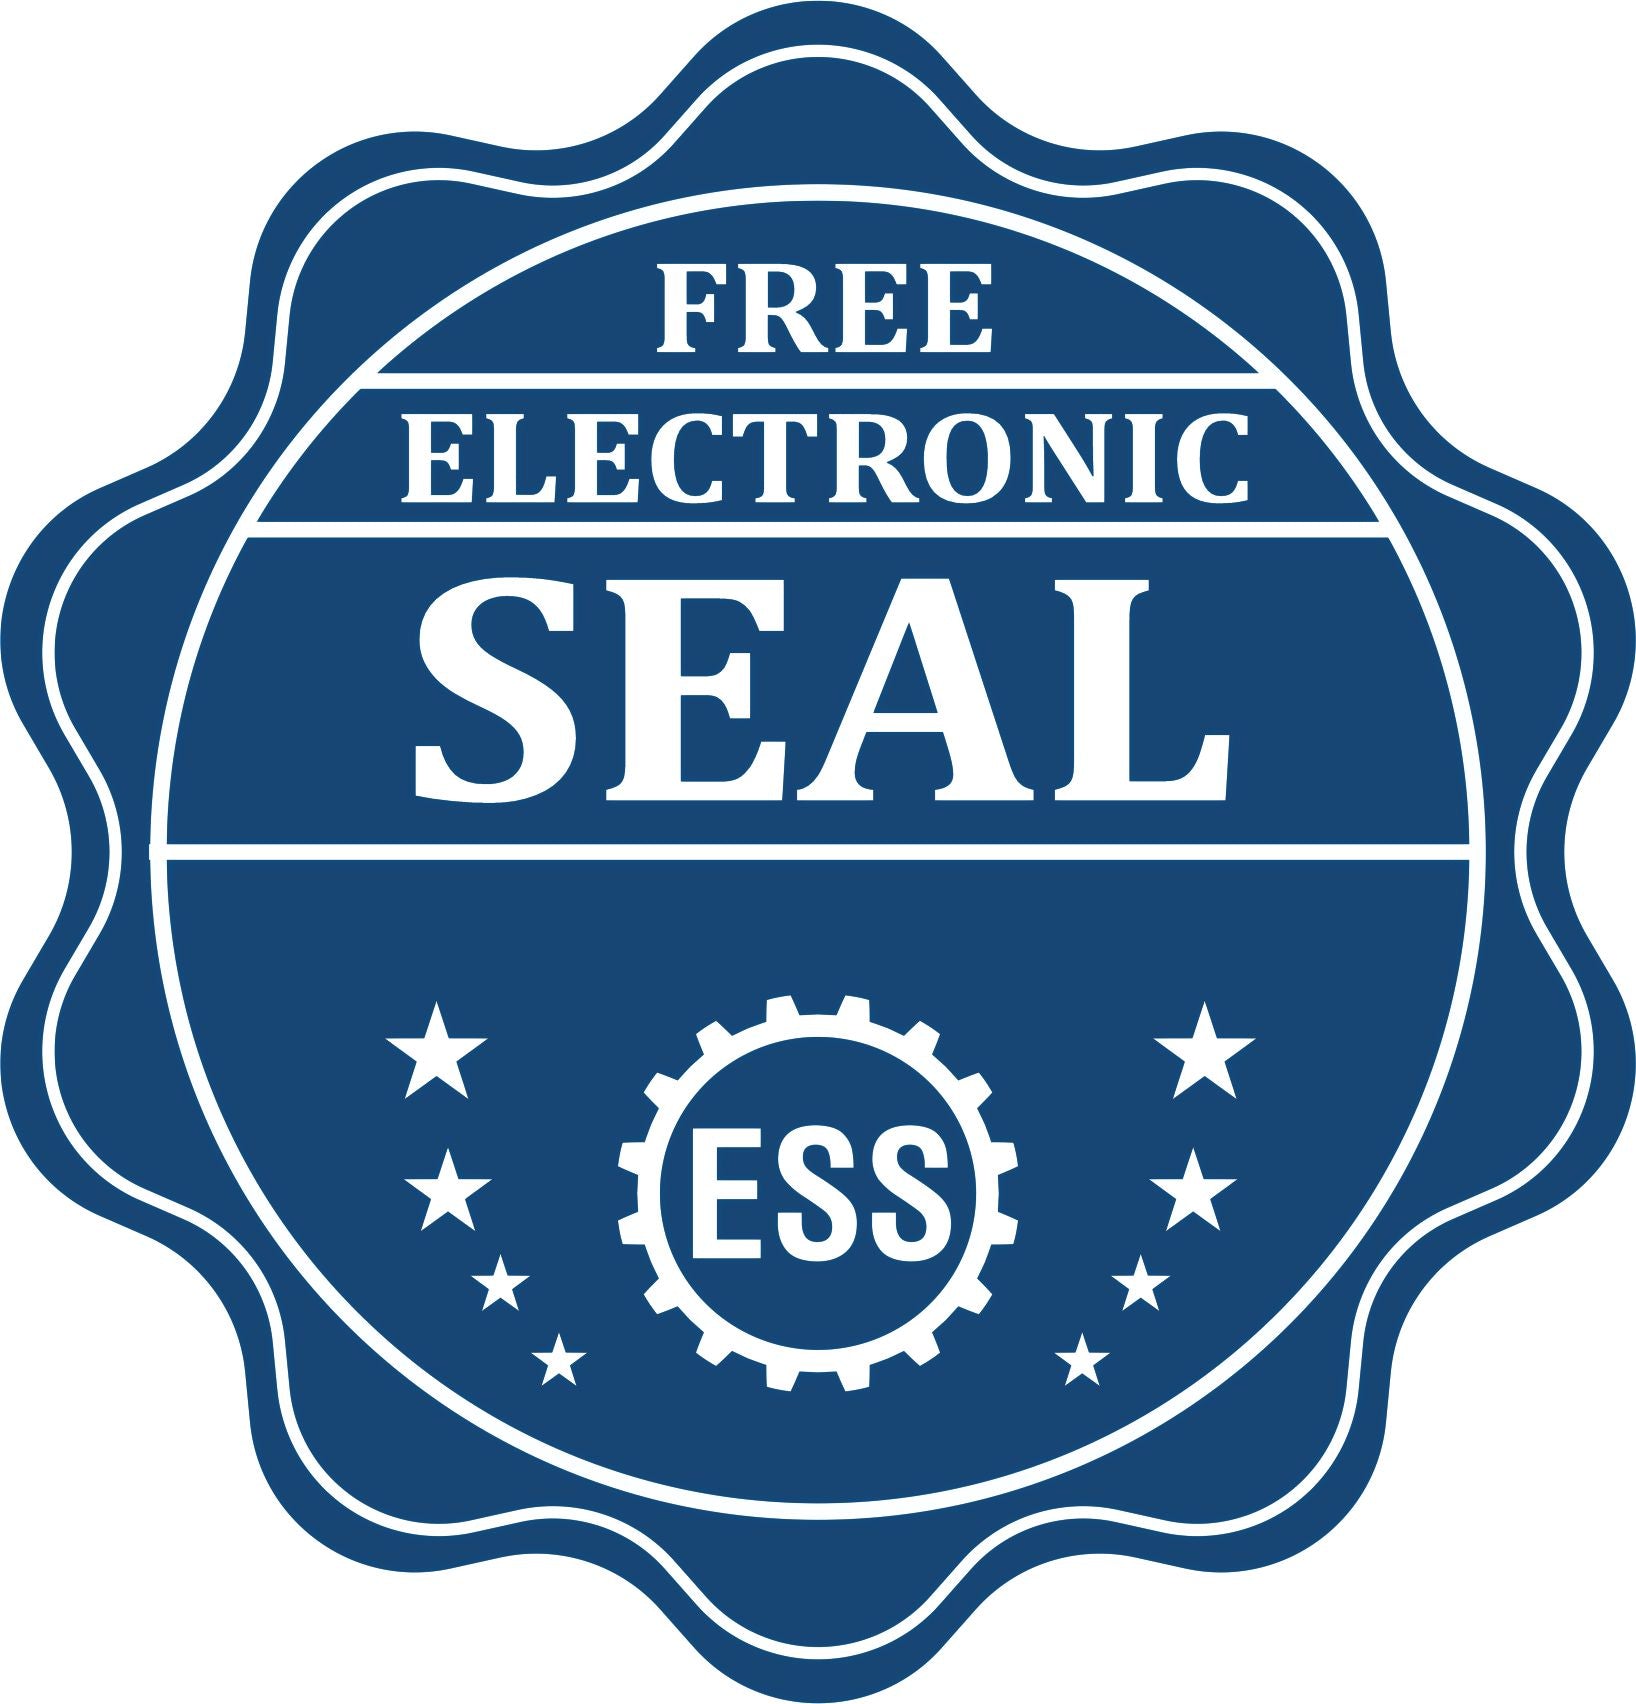 A badge showing a free electronic seal for the Soft Pocket Utah Landscape Architect Embosser with stars and the ESS gear on the emblem.